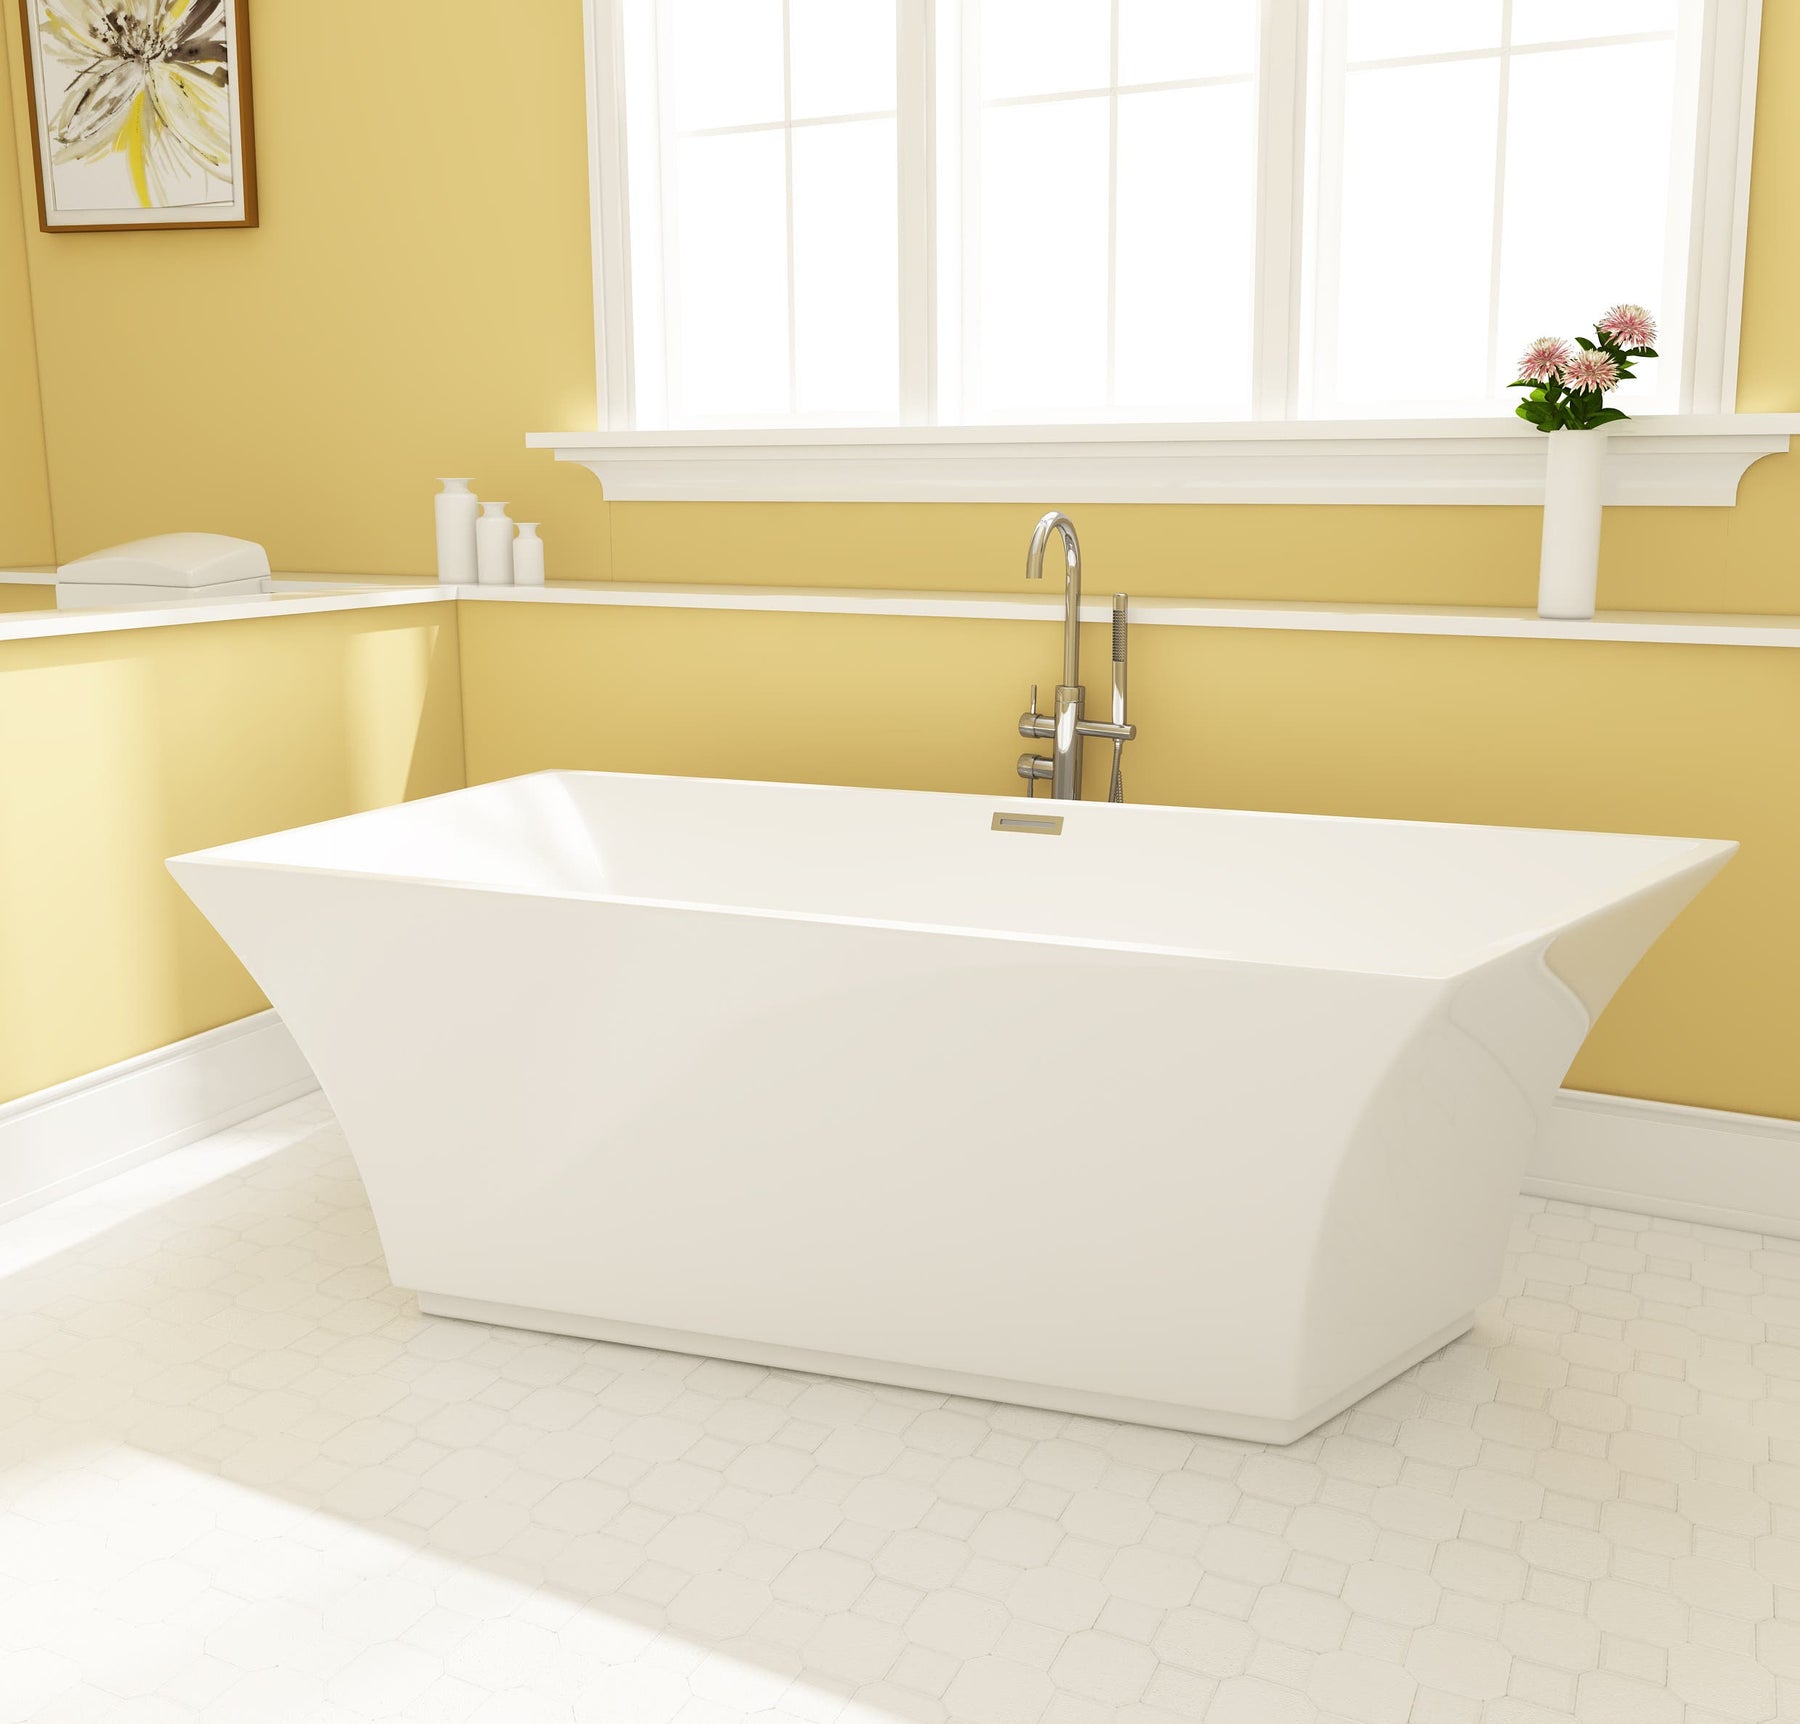 5 Tub Styles You Should Consider For Your Next Bathroom Remodel